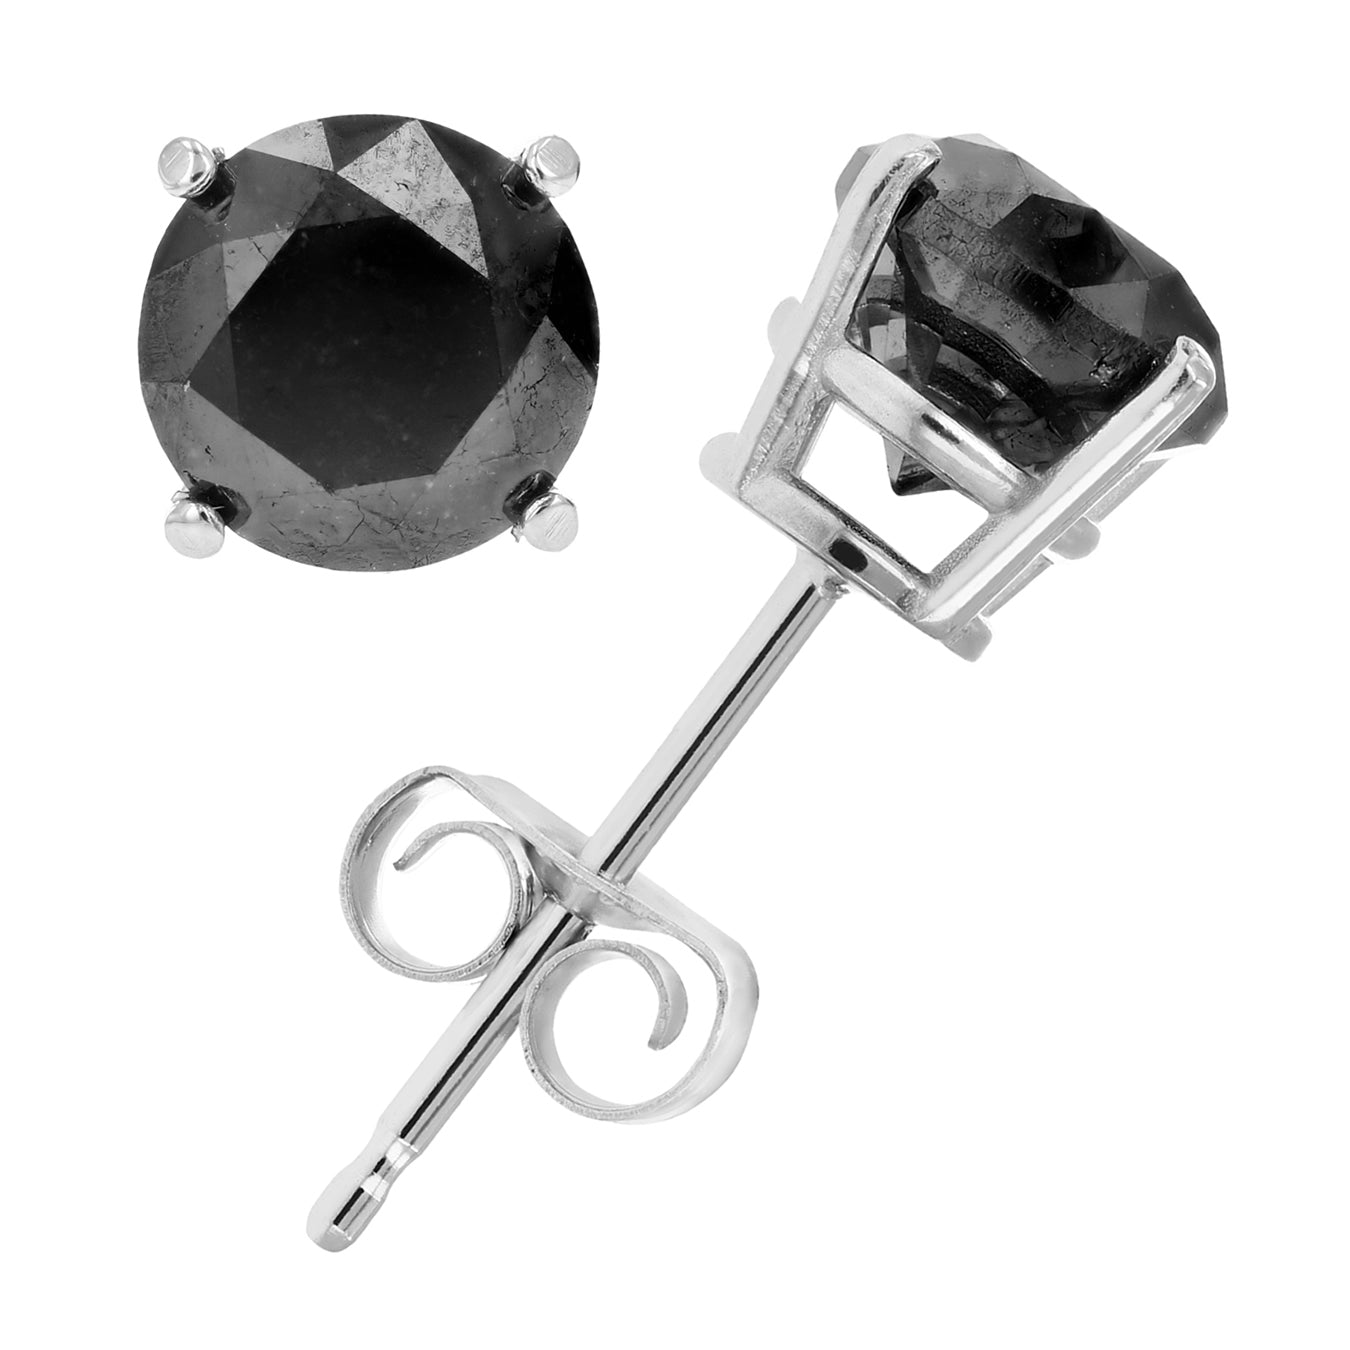 10 cttw Black Diamond Stud Earrings .925 Sterling Silver Round with Push Backs